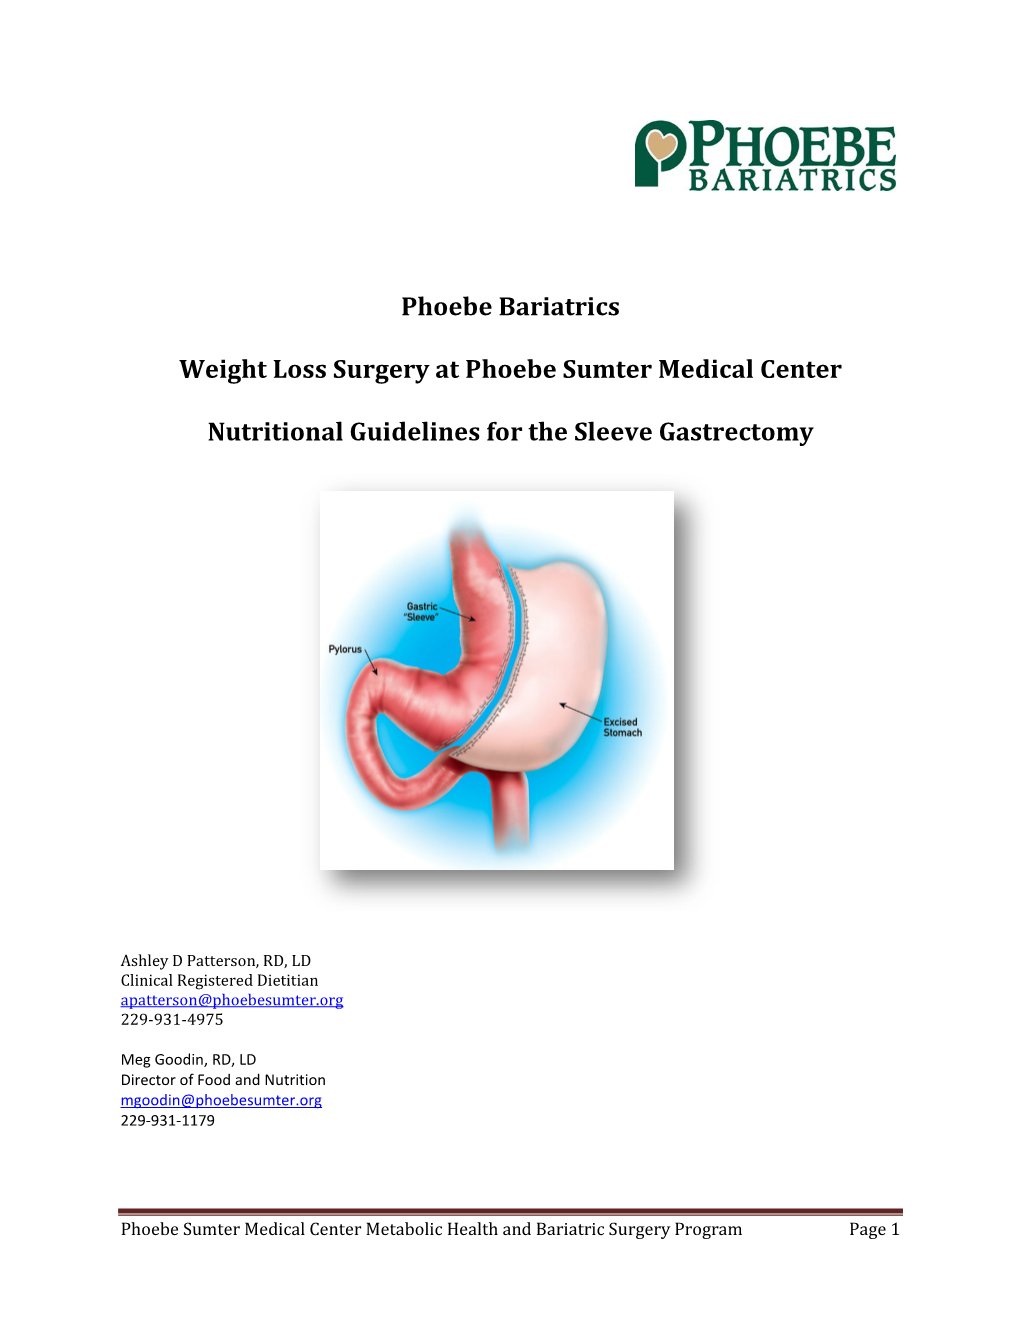 Phoebe Bariatrics Weight Loss Surgery at Phoebe Sumter Medical Center Nutritional Guidelines for the Sleeve Gastrectomy